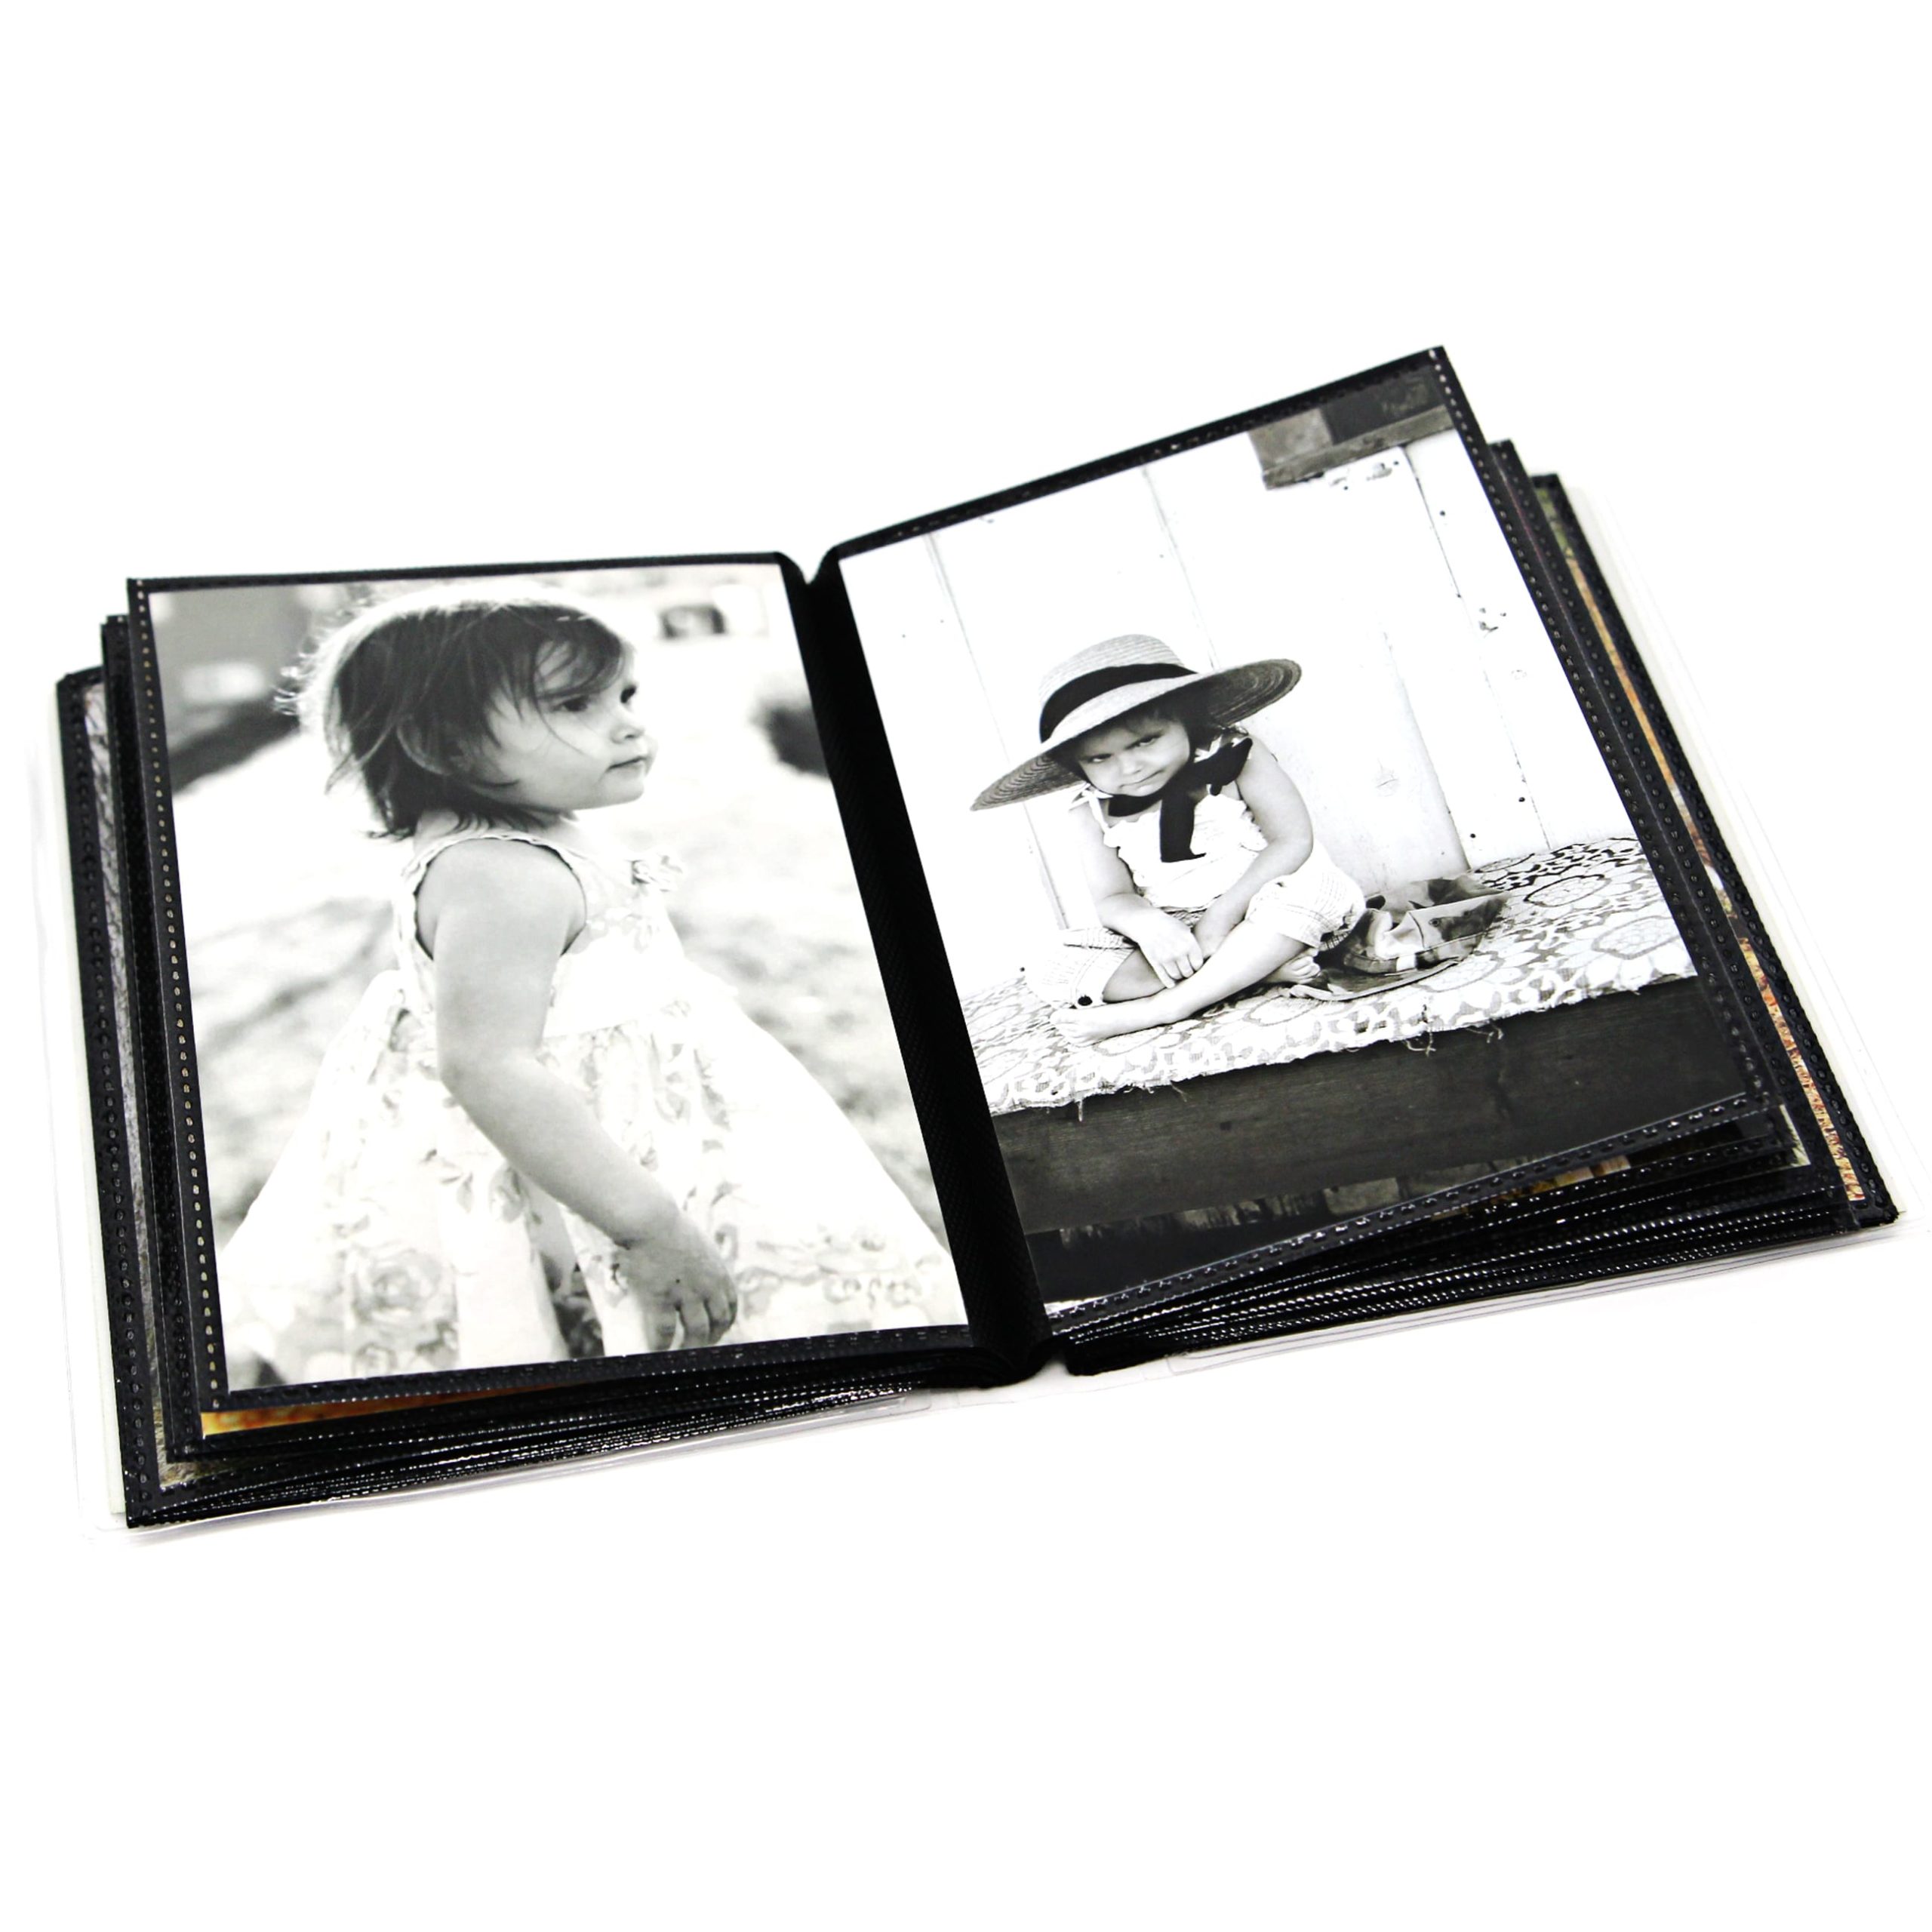 4 x 6 Photo Albums Pack of 3, Each Mini Photo Album Holds Up to 48 4x6  Photos - CocoPolka Company